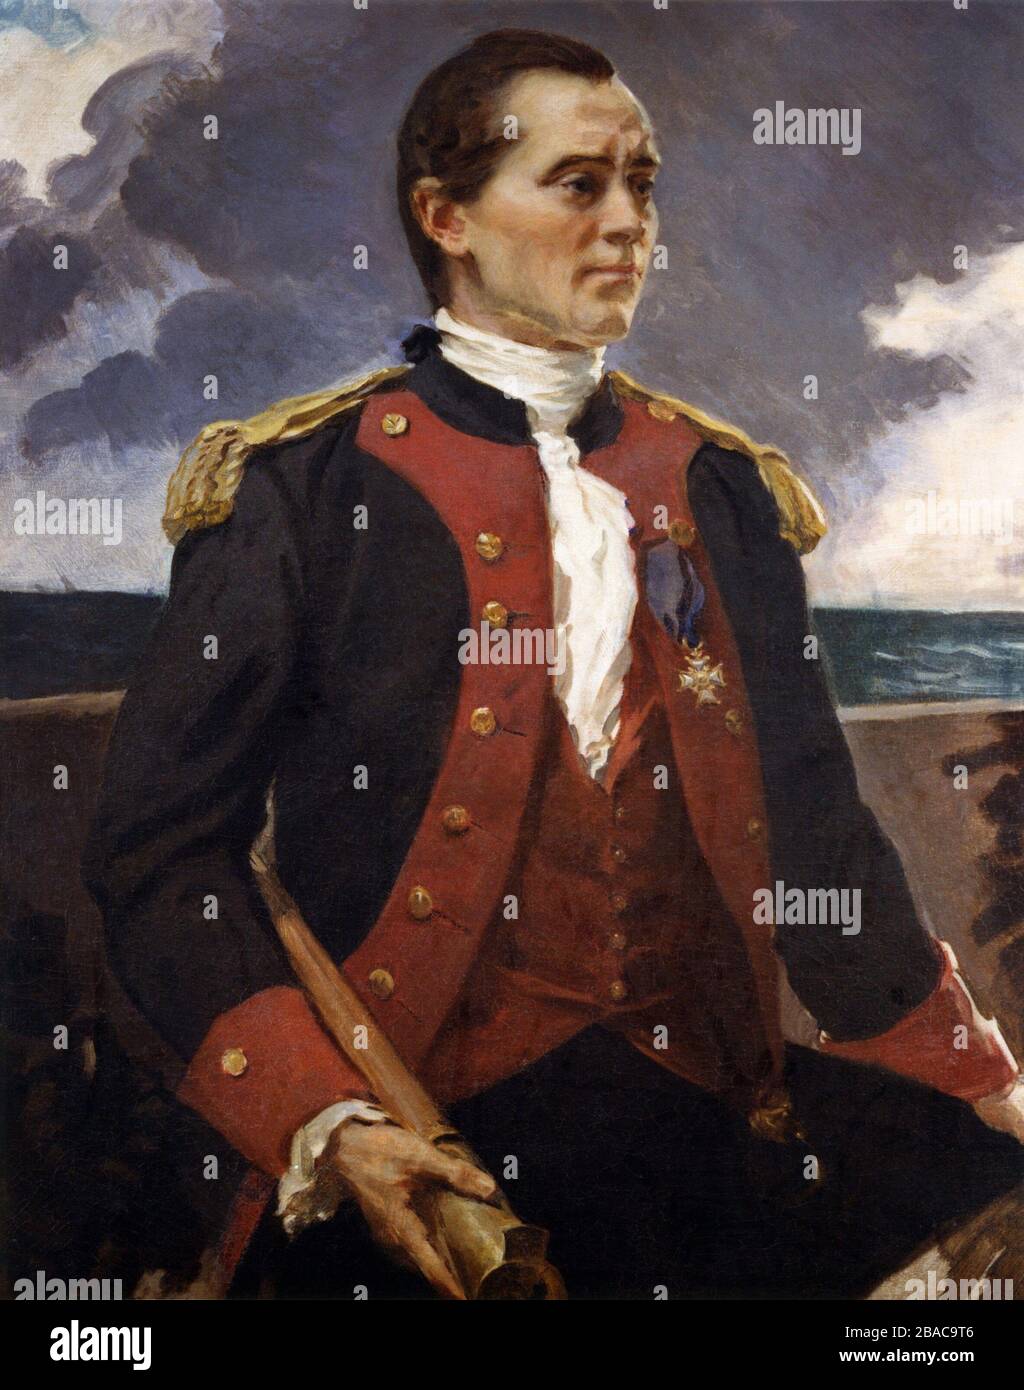 Captain John Paul Jones, Continential Navy, in painting by Cecilia Beaux, 1906. He served in the American navy from December 1775 until 1783, mostly raiding British merchant ships. His most famous battle was between the British ship, Serapis, captained by Captain Richard Pearson, and Jones' French built ship, Bonhomme Richard, on Sept. 23, 1779  (BSLOC_2019_3_160) Stock Photo